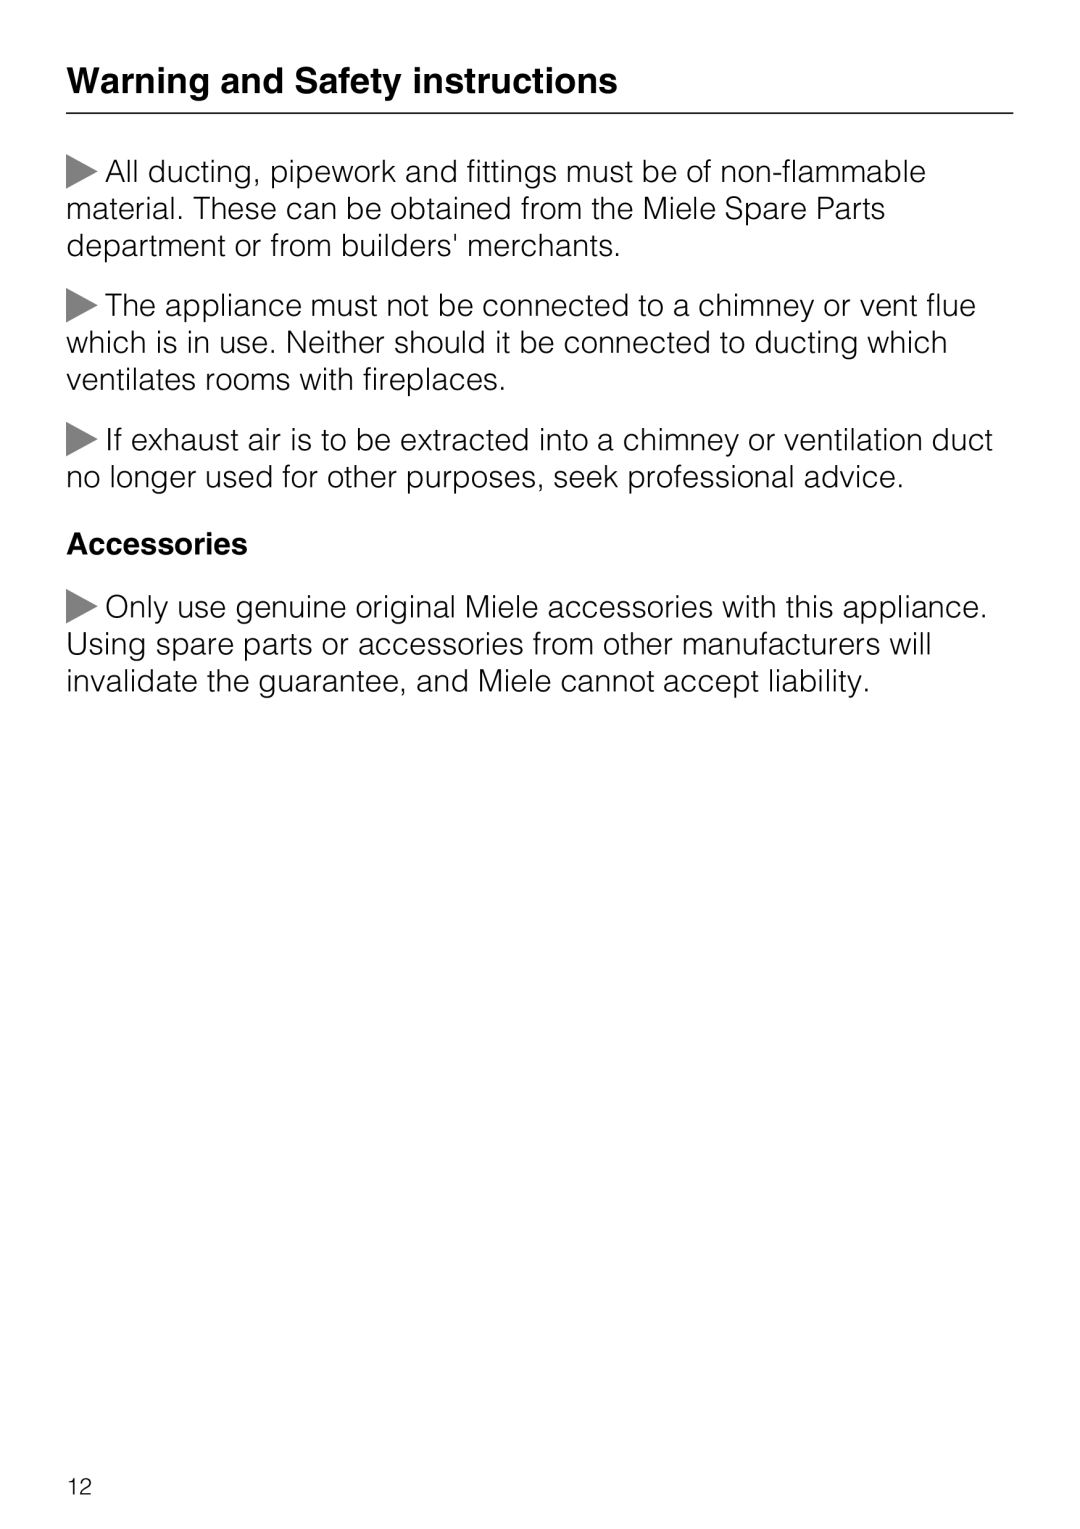 Miele 09 730 840 installation instructions Accessories, Warning and Safety instructions 